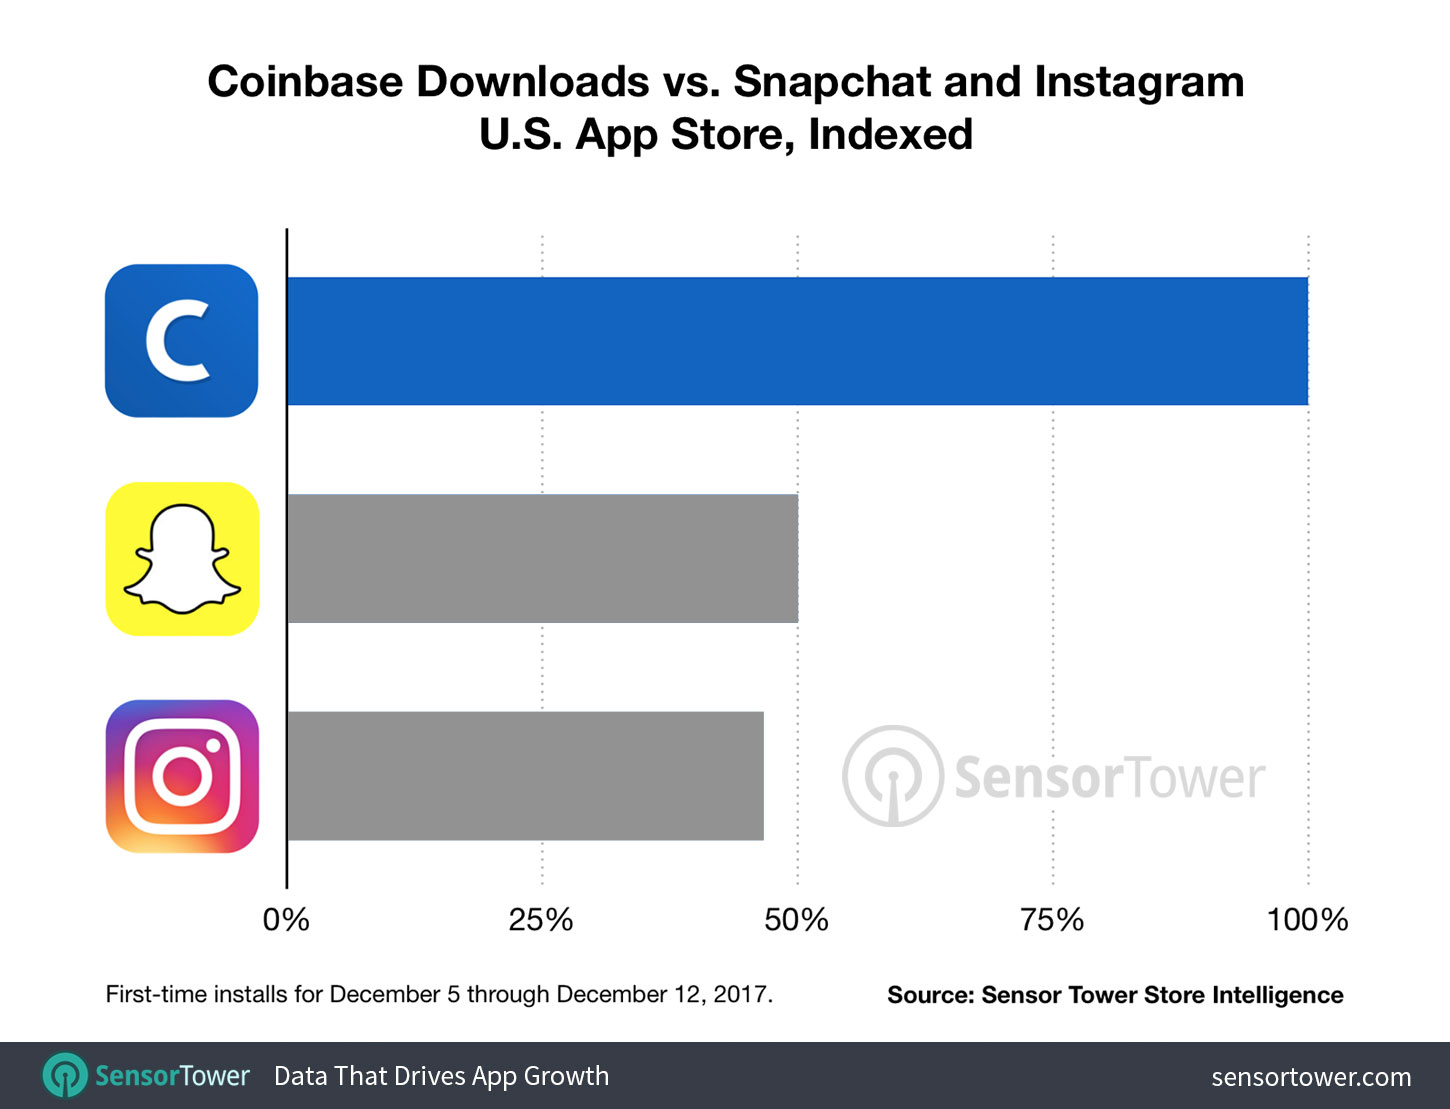 Indexed downloads for Coinbase, Snapchat, and Instagram on the U.S. App Store between December 5 and December 12, 2017